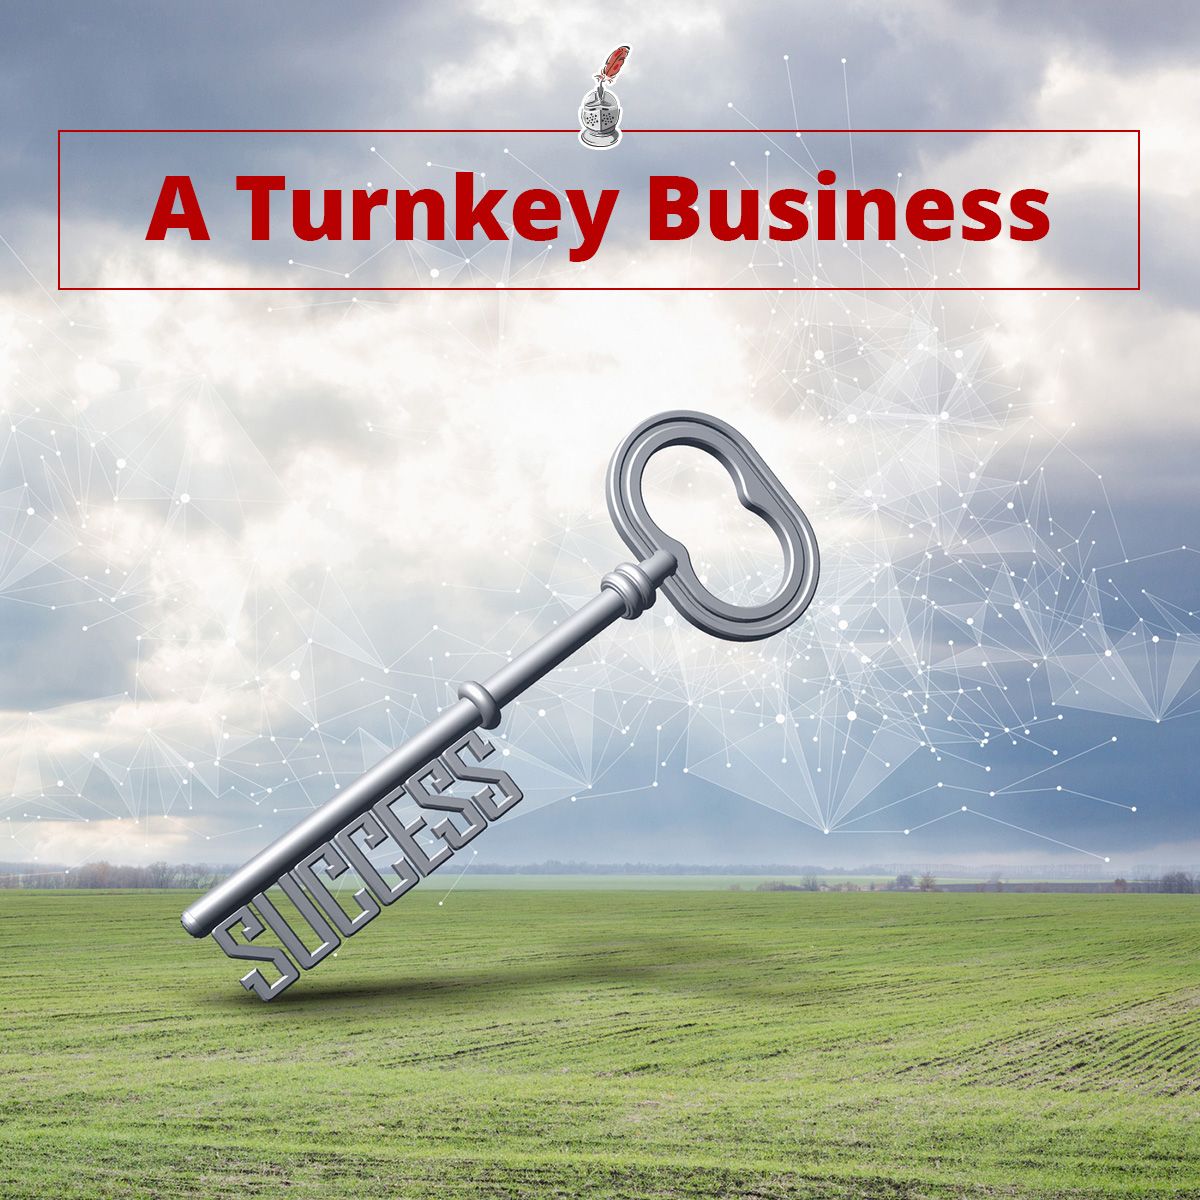 A Turnkey Business